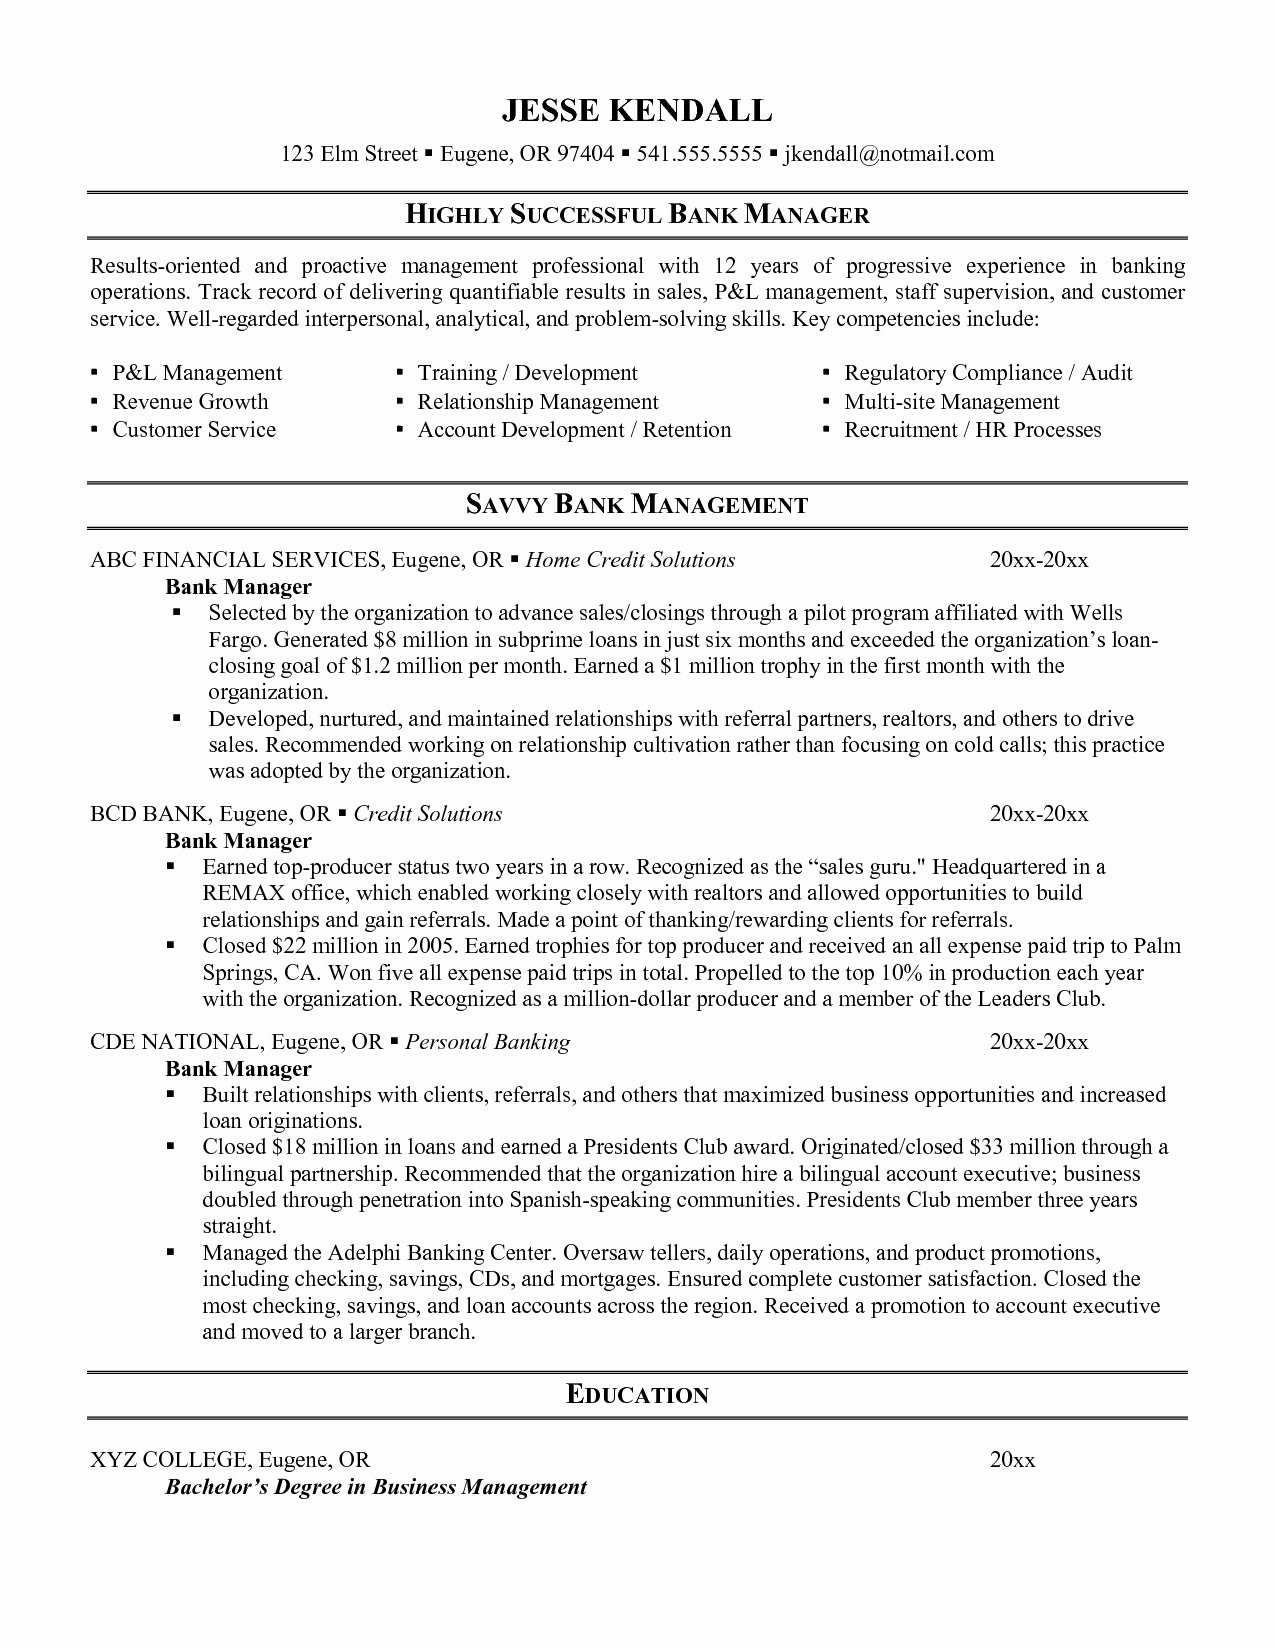 Bank Manager Resume Template